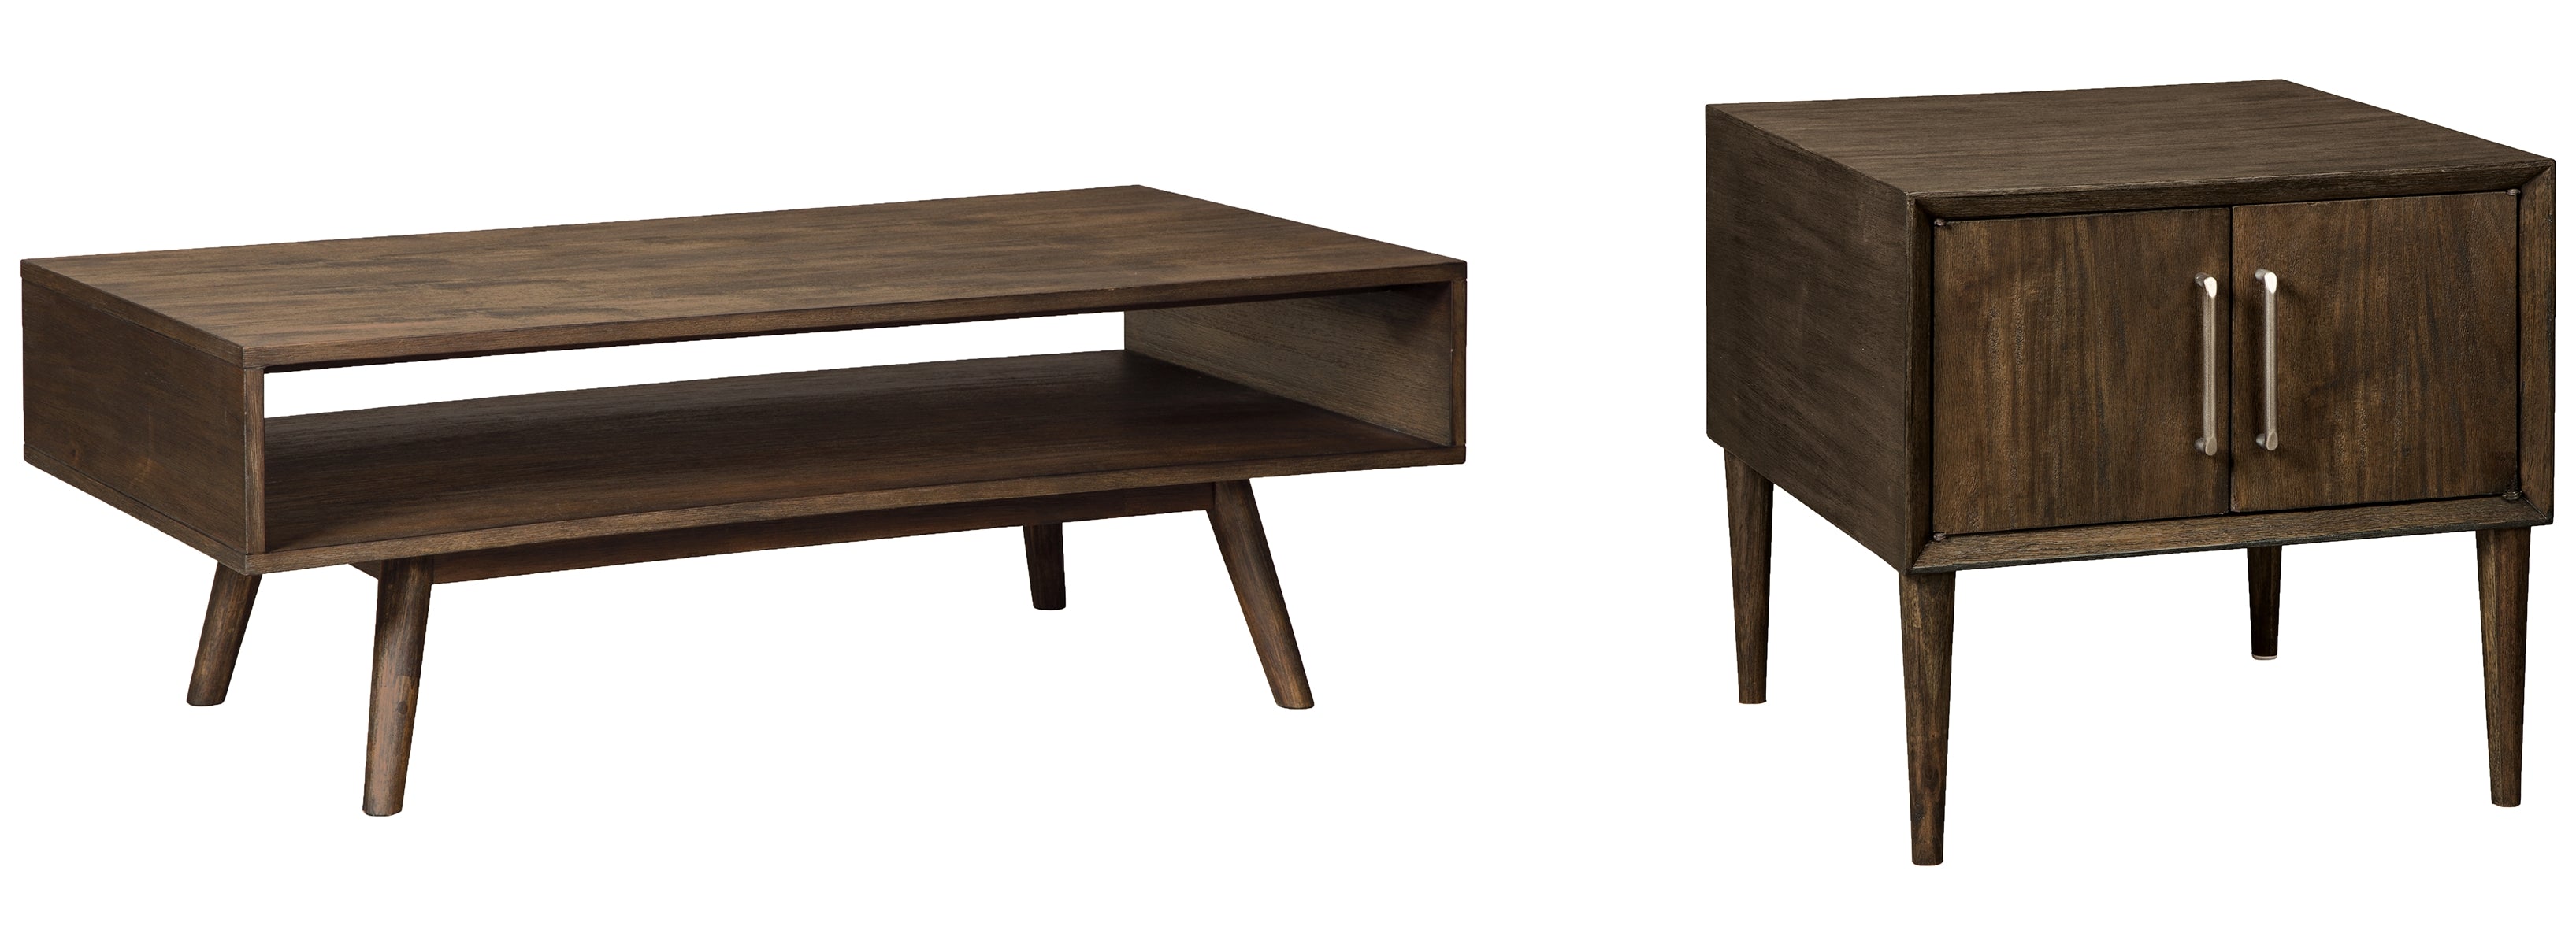 Kisper Coffee Table with 1 End Table